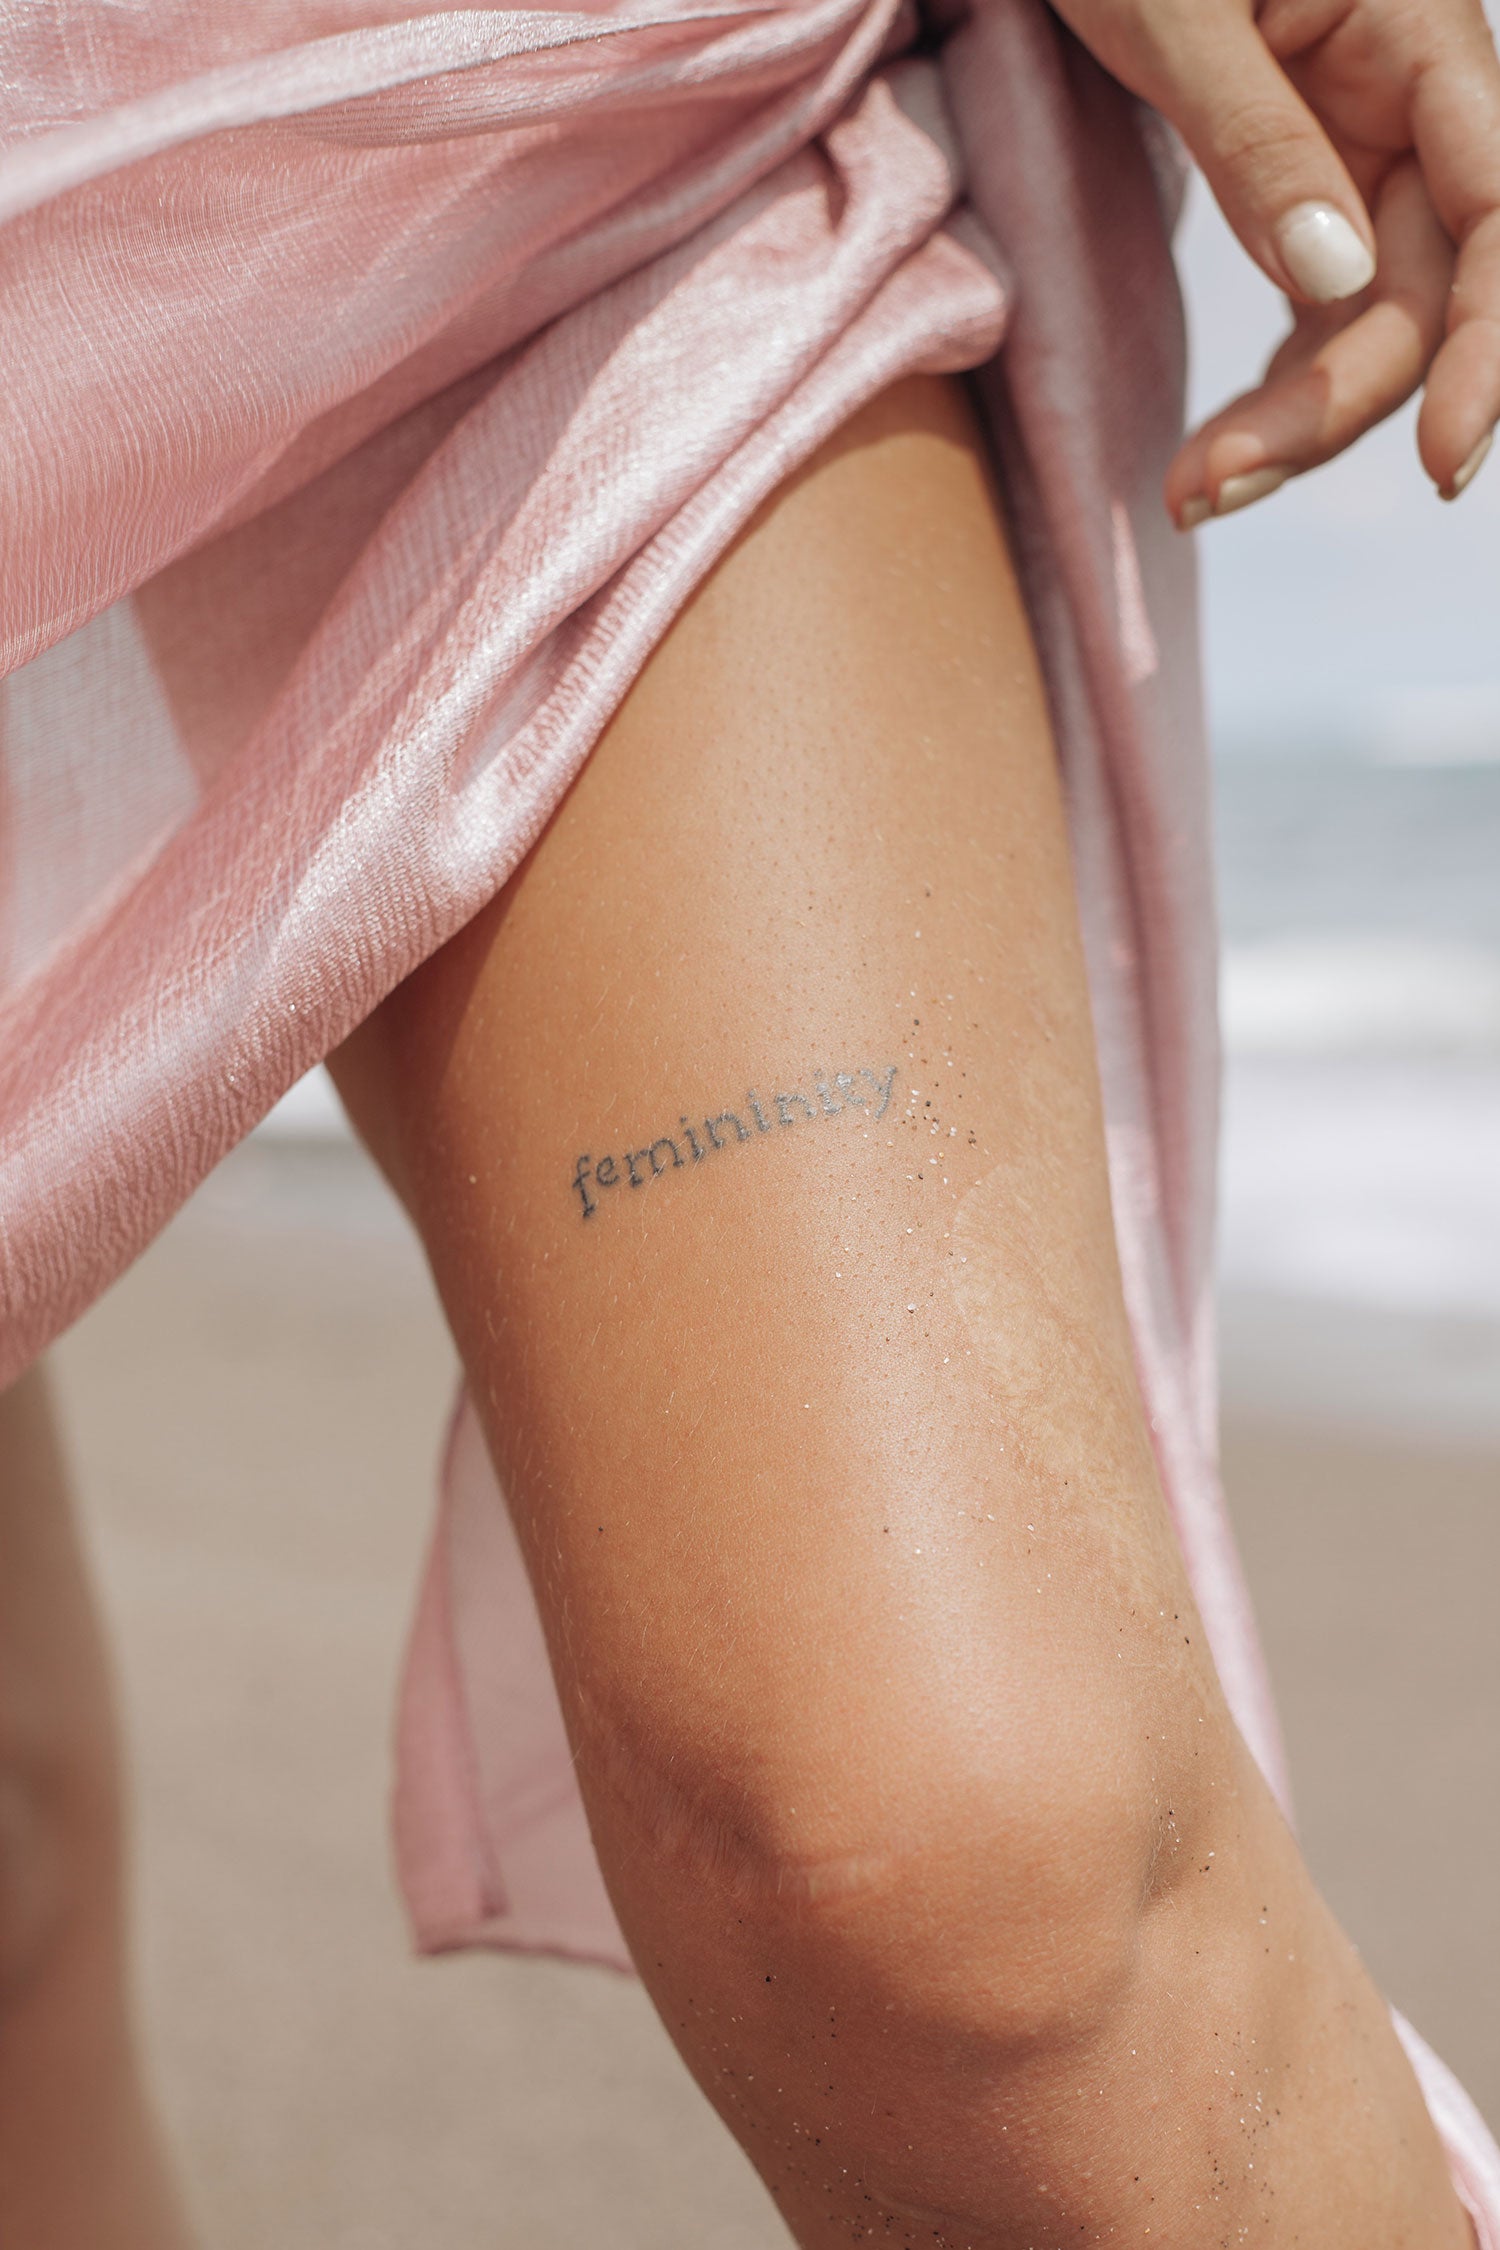 A woman with the word femininity tattooed on her thigh walks on the beach in a pink coverup. Image by Ksu&Eli.